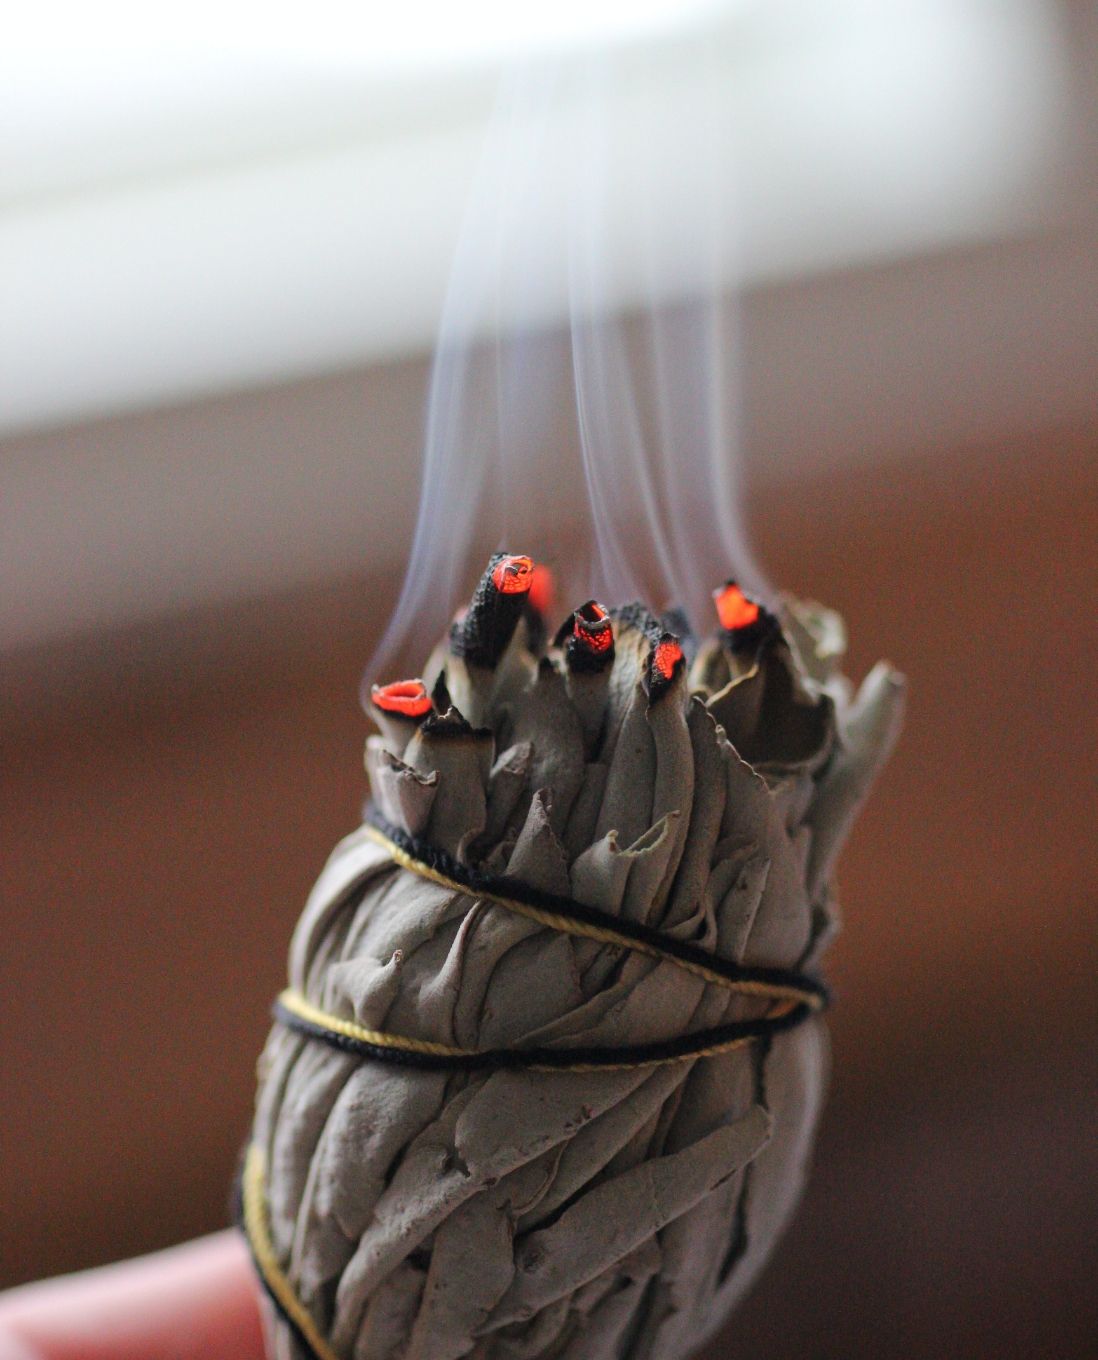 The New Moon Library, 4 cleansing rituals for the next new moon, smoke smudging & scents